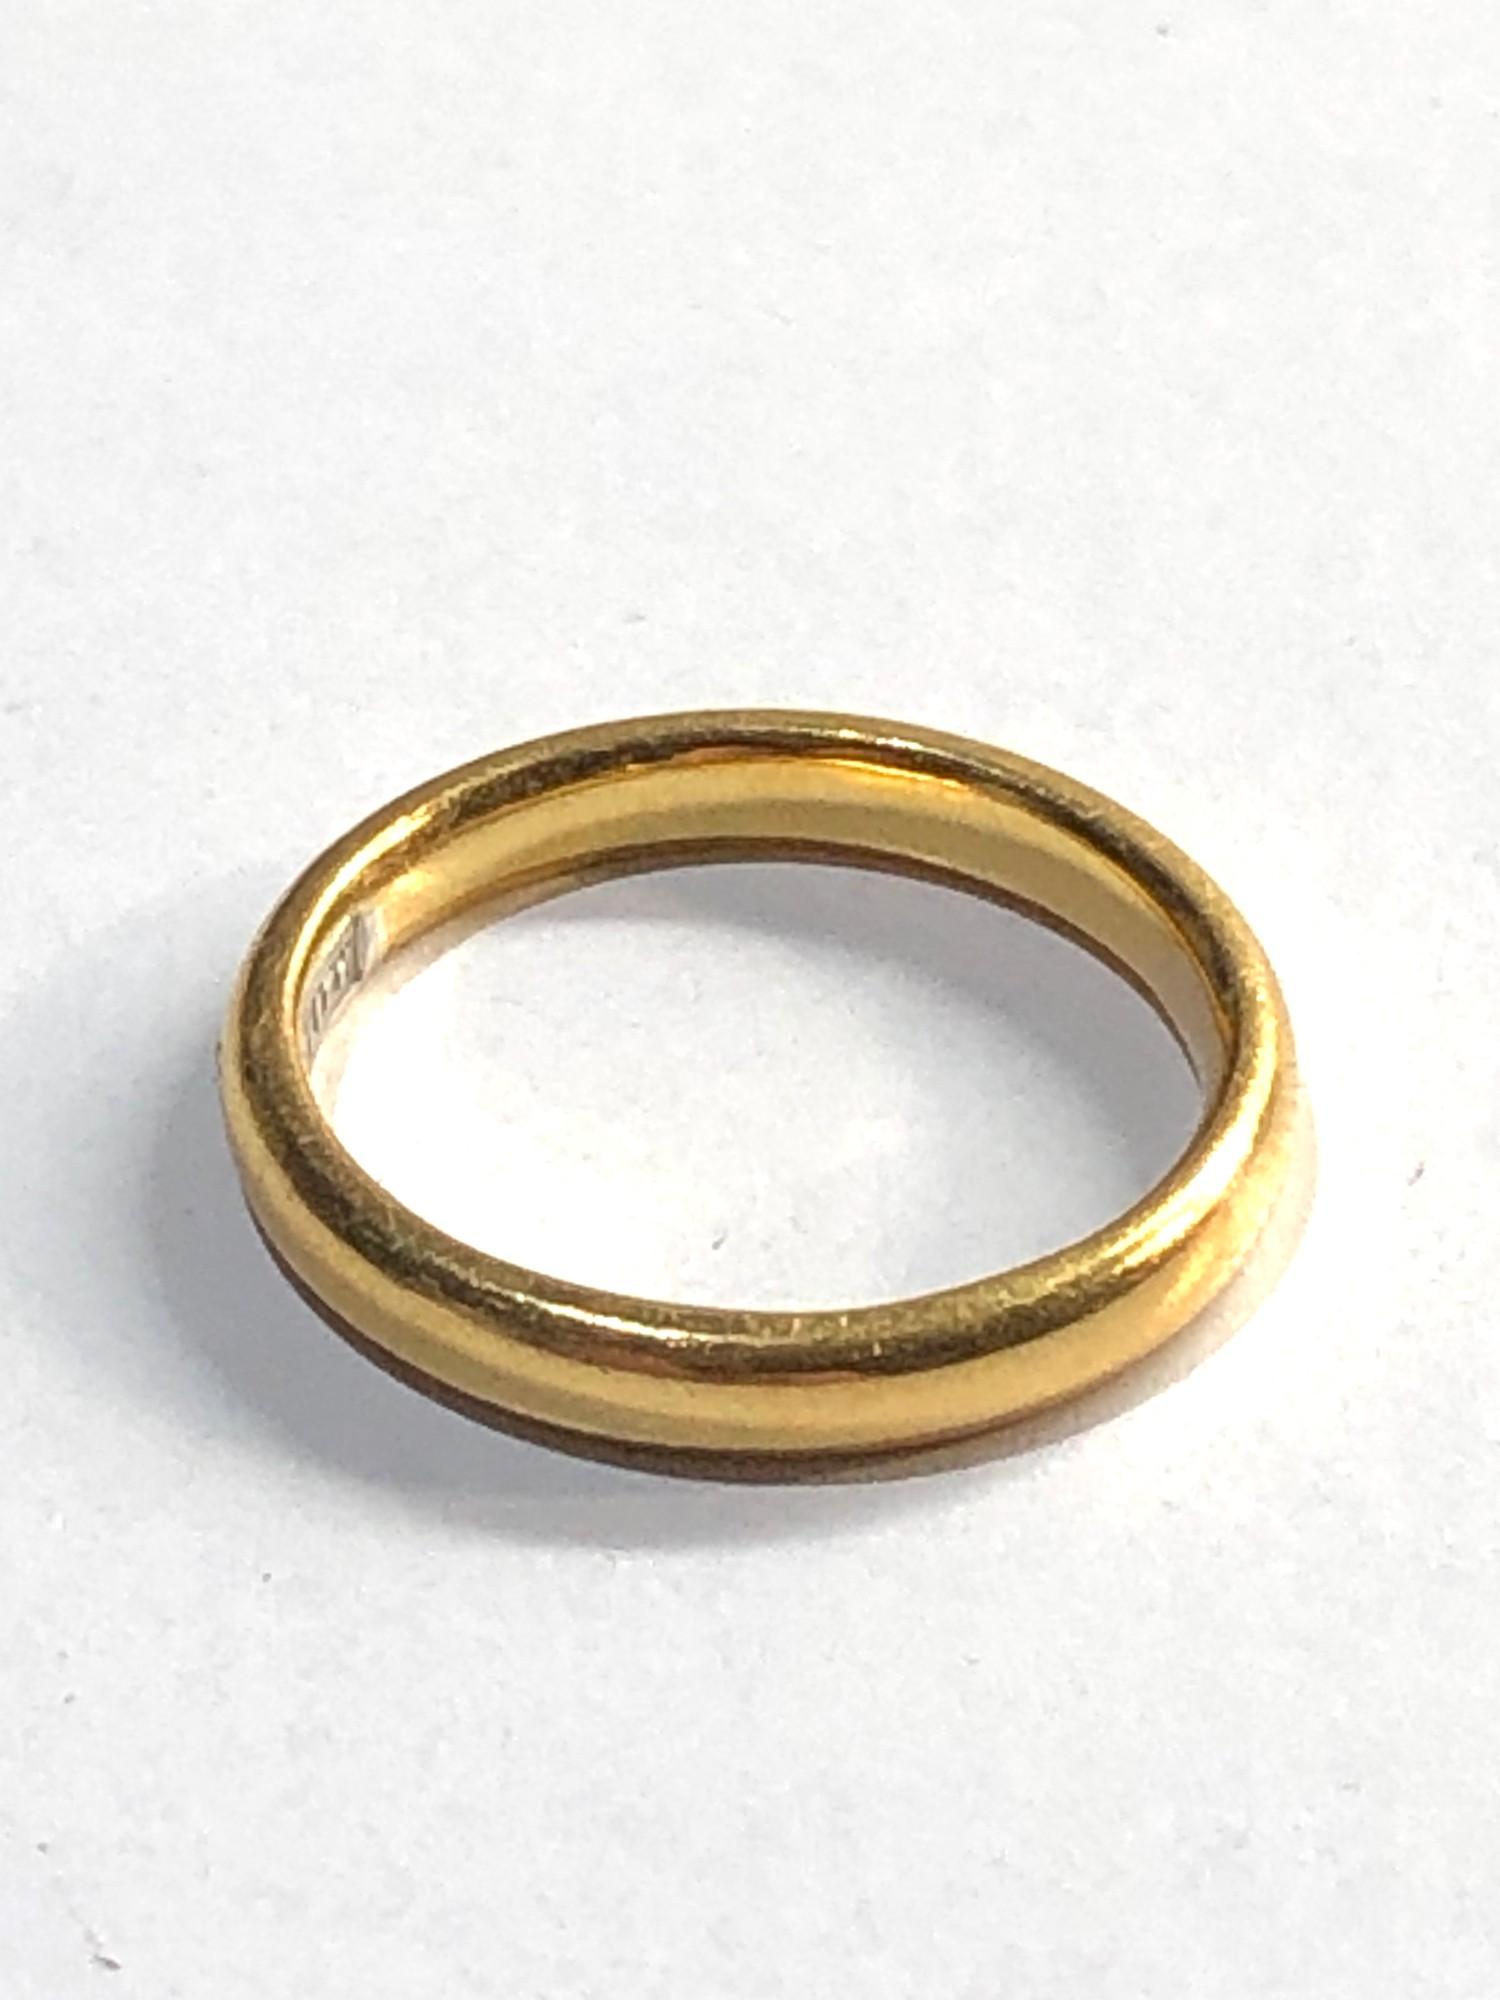 22ct gold wedding ring weight 3.4g ring size approx I/J